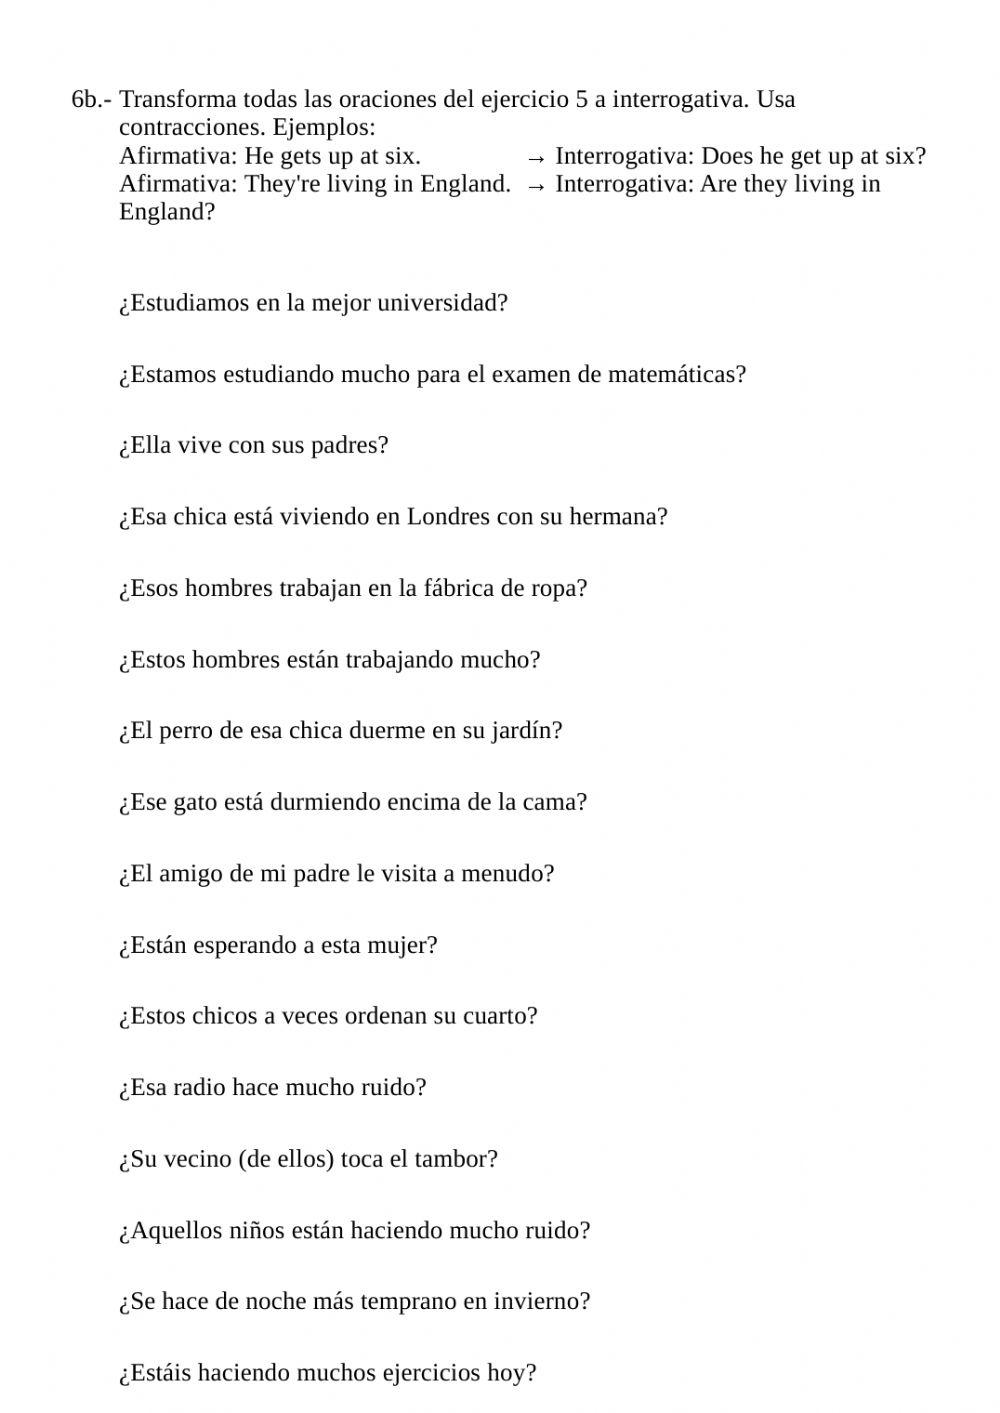 Review work 6 - Transform into interrogative (translation from Spanish - present simple & continuous)